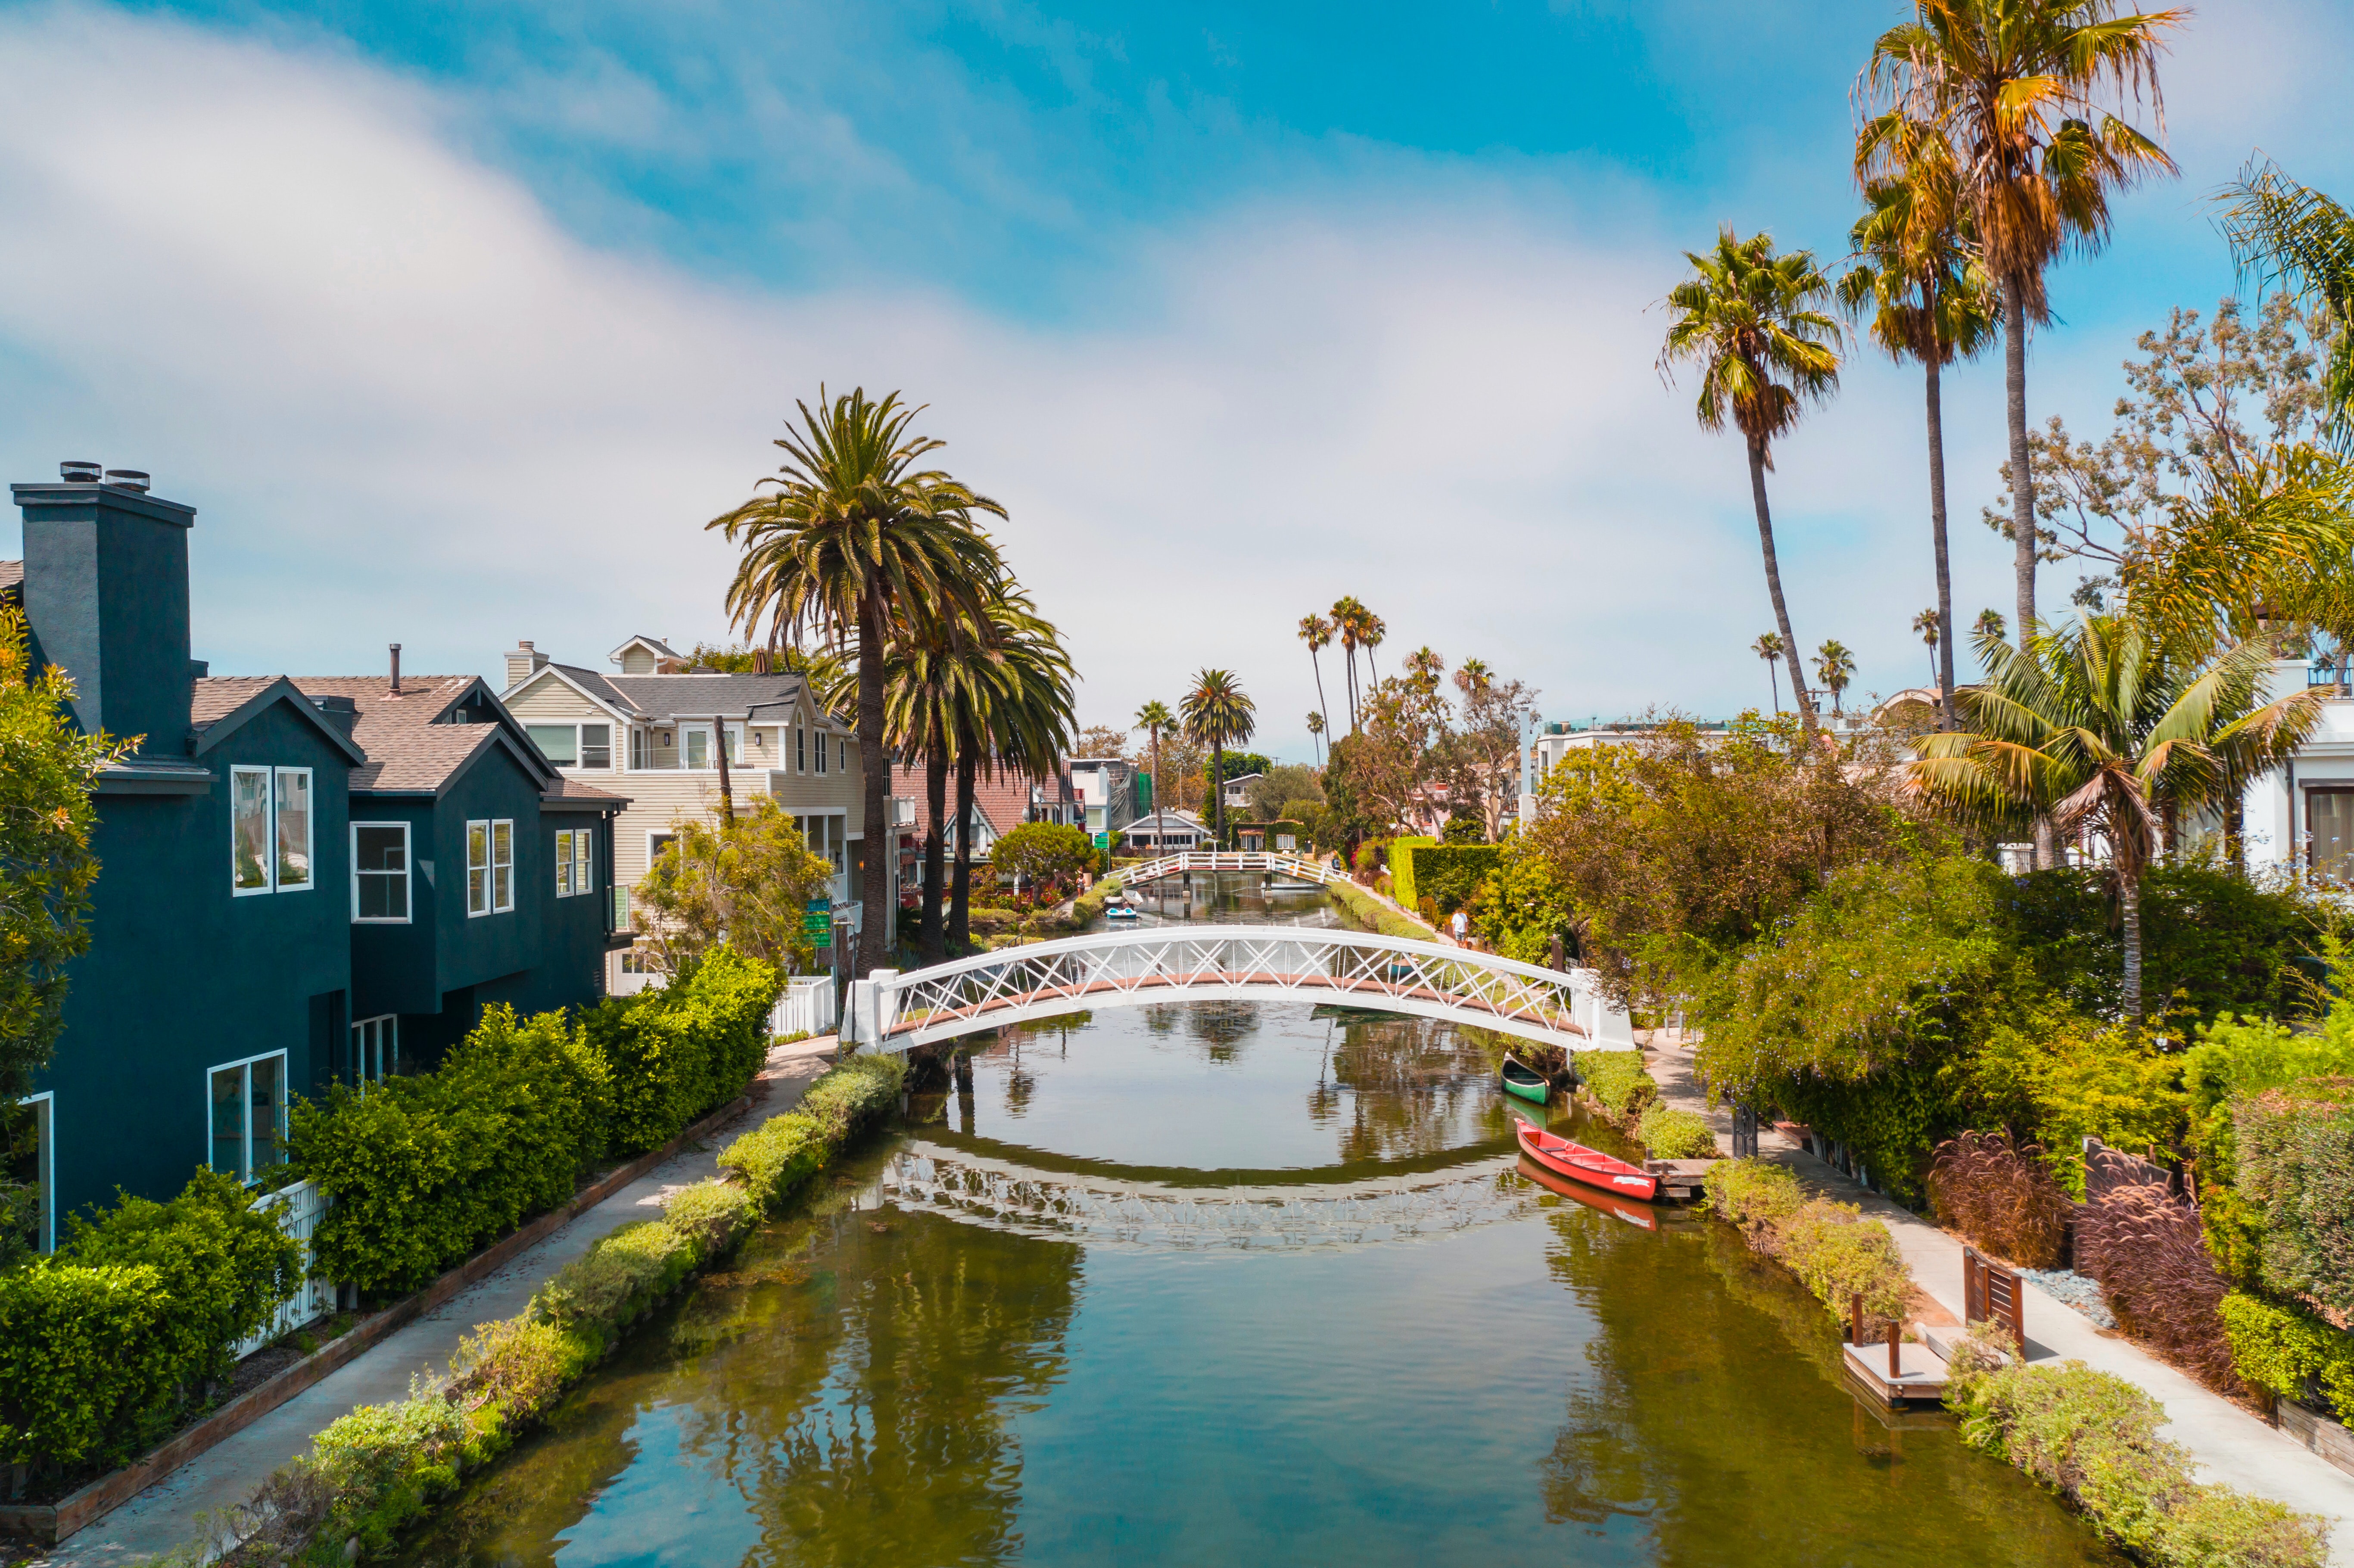 A photo of one of the waterways in Venice california with a white bridge going over the water from left to right. Houses on either side of the river and palm trees in the background.